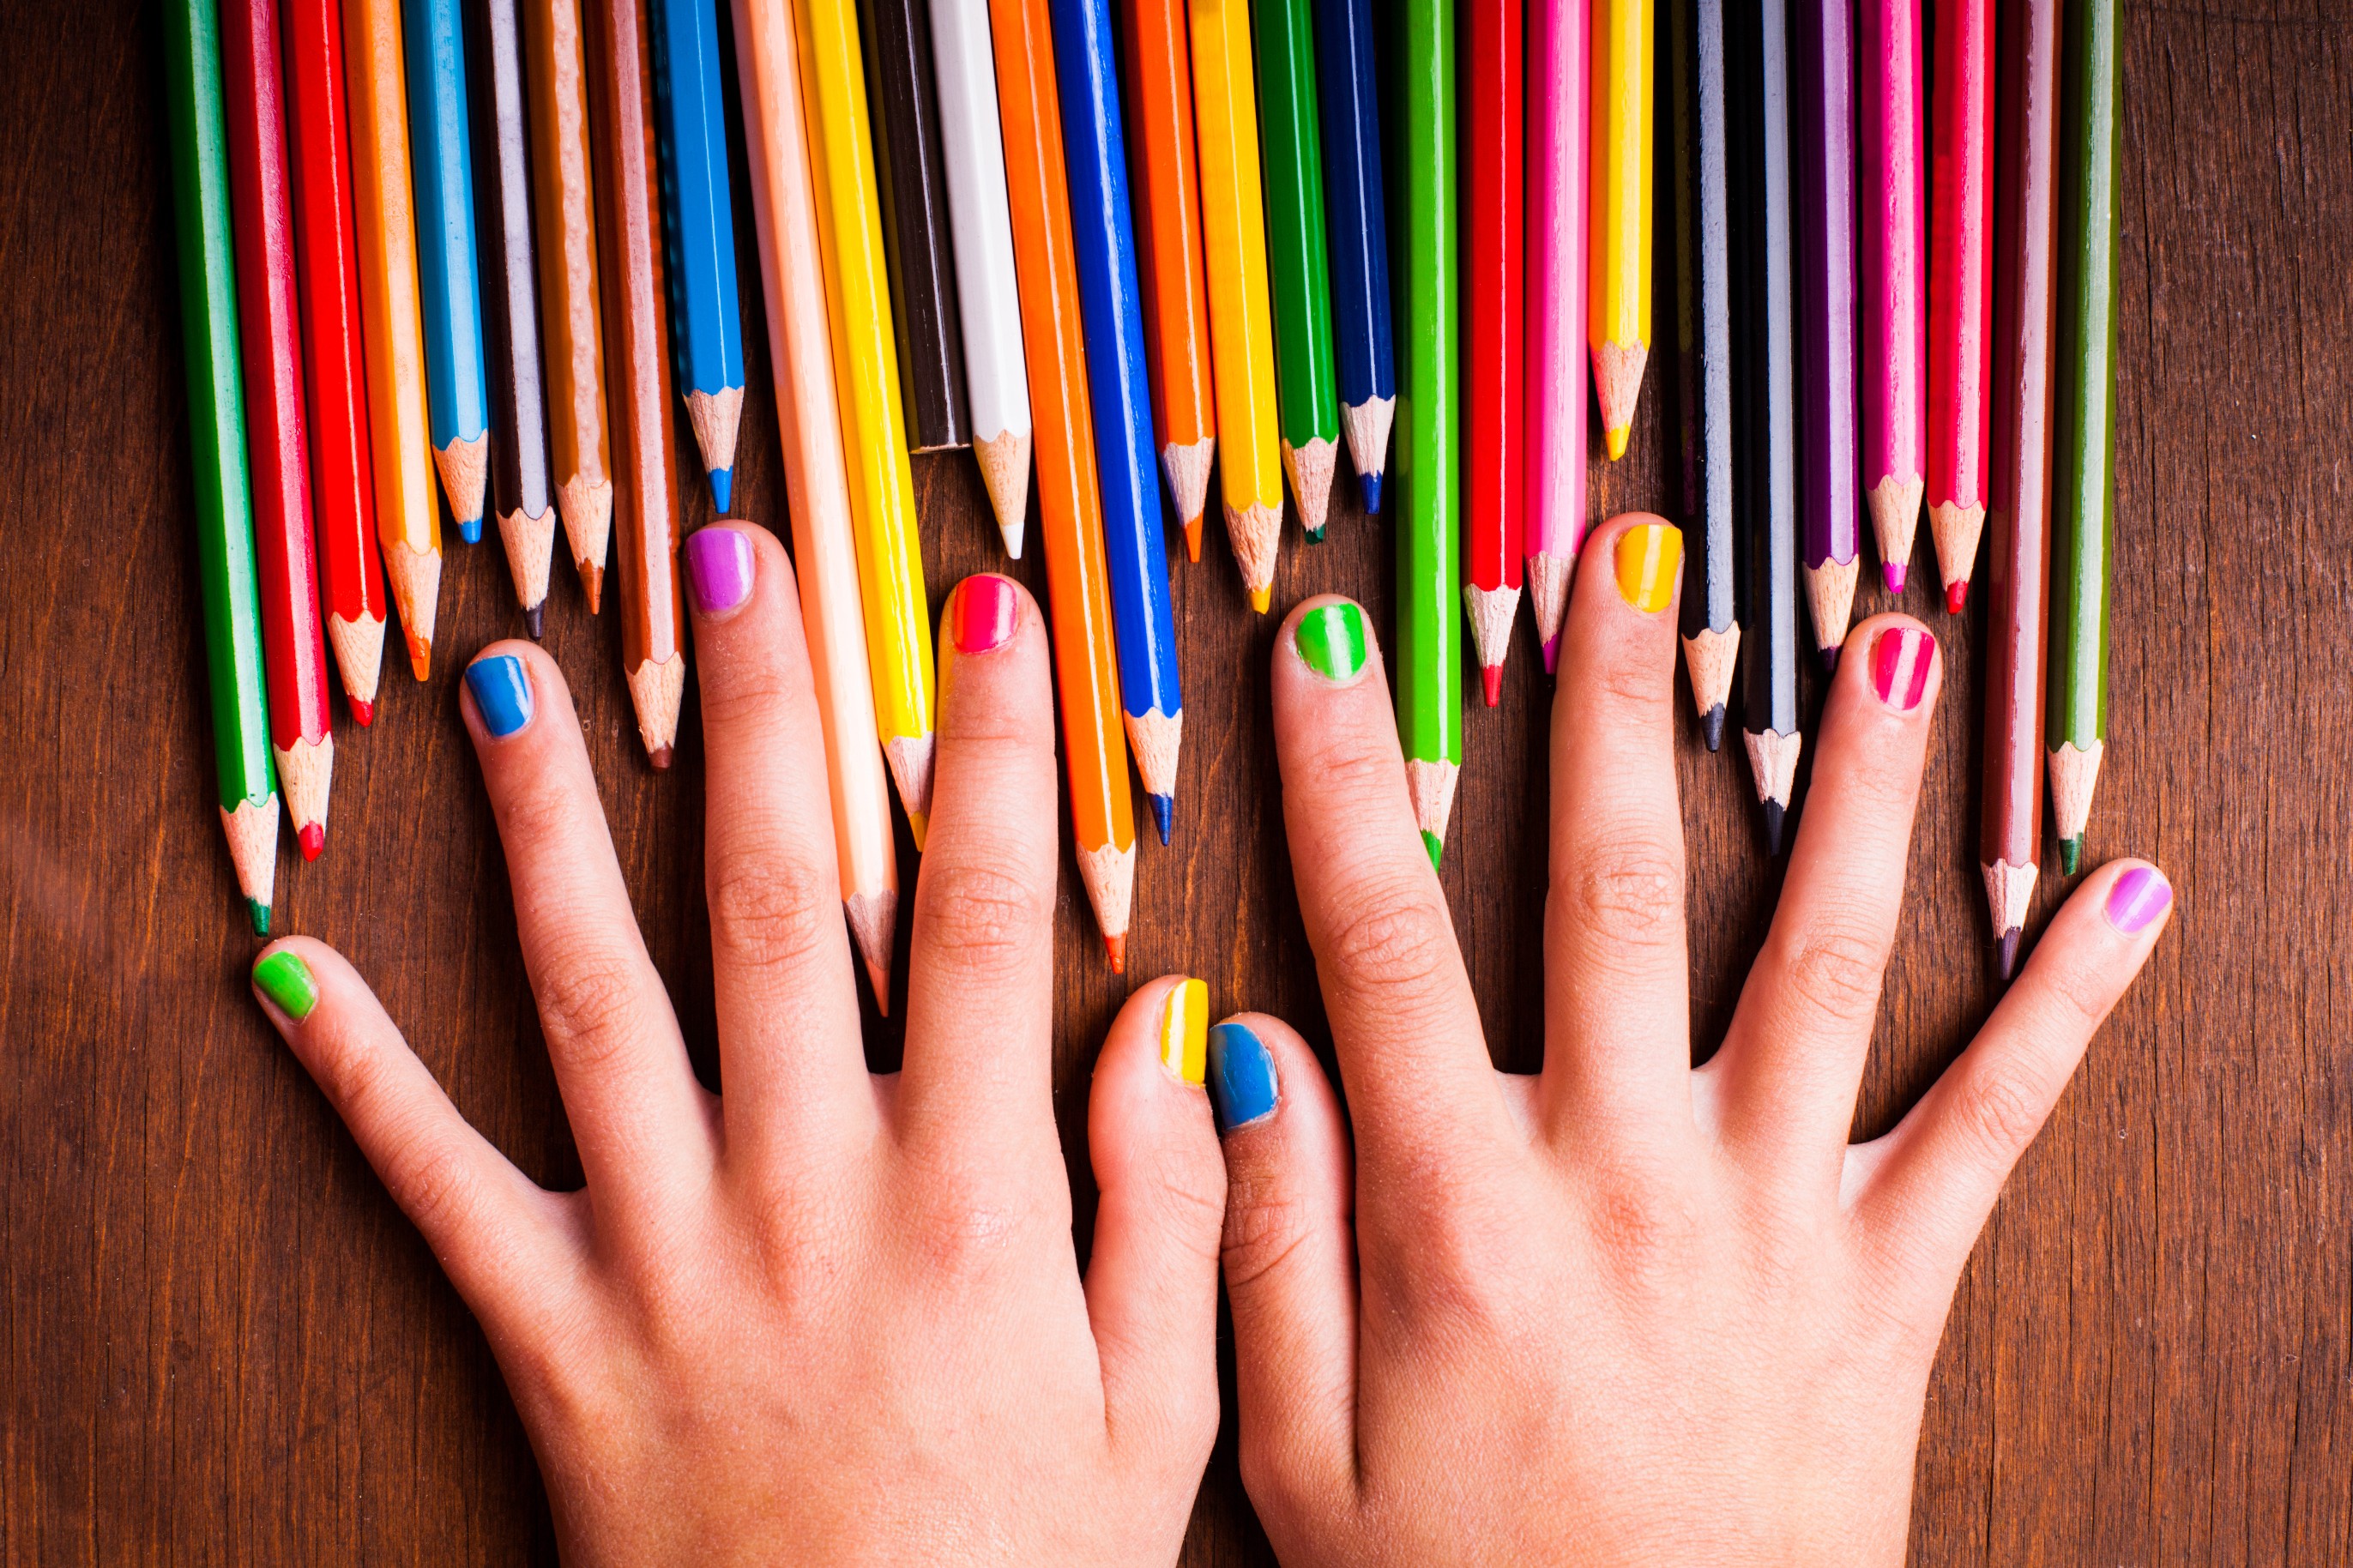 General 2743x1828 hands colorful pencils closeup fingers painted nails wooden surface wood